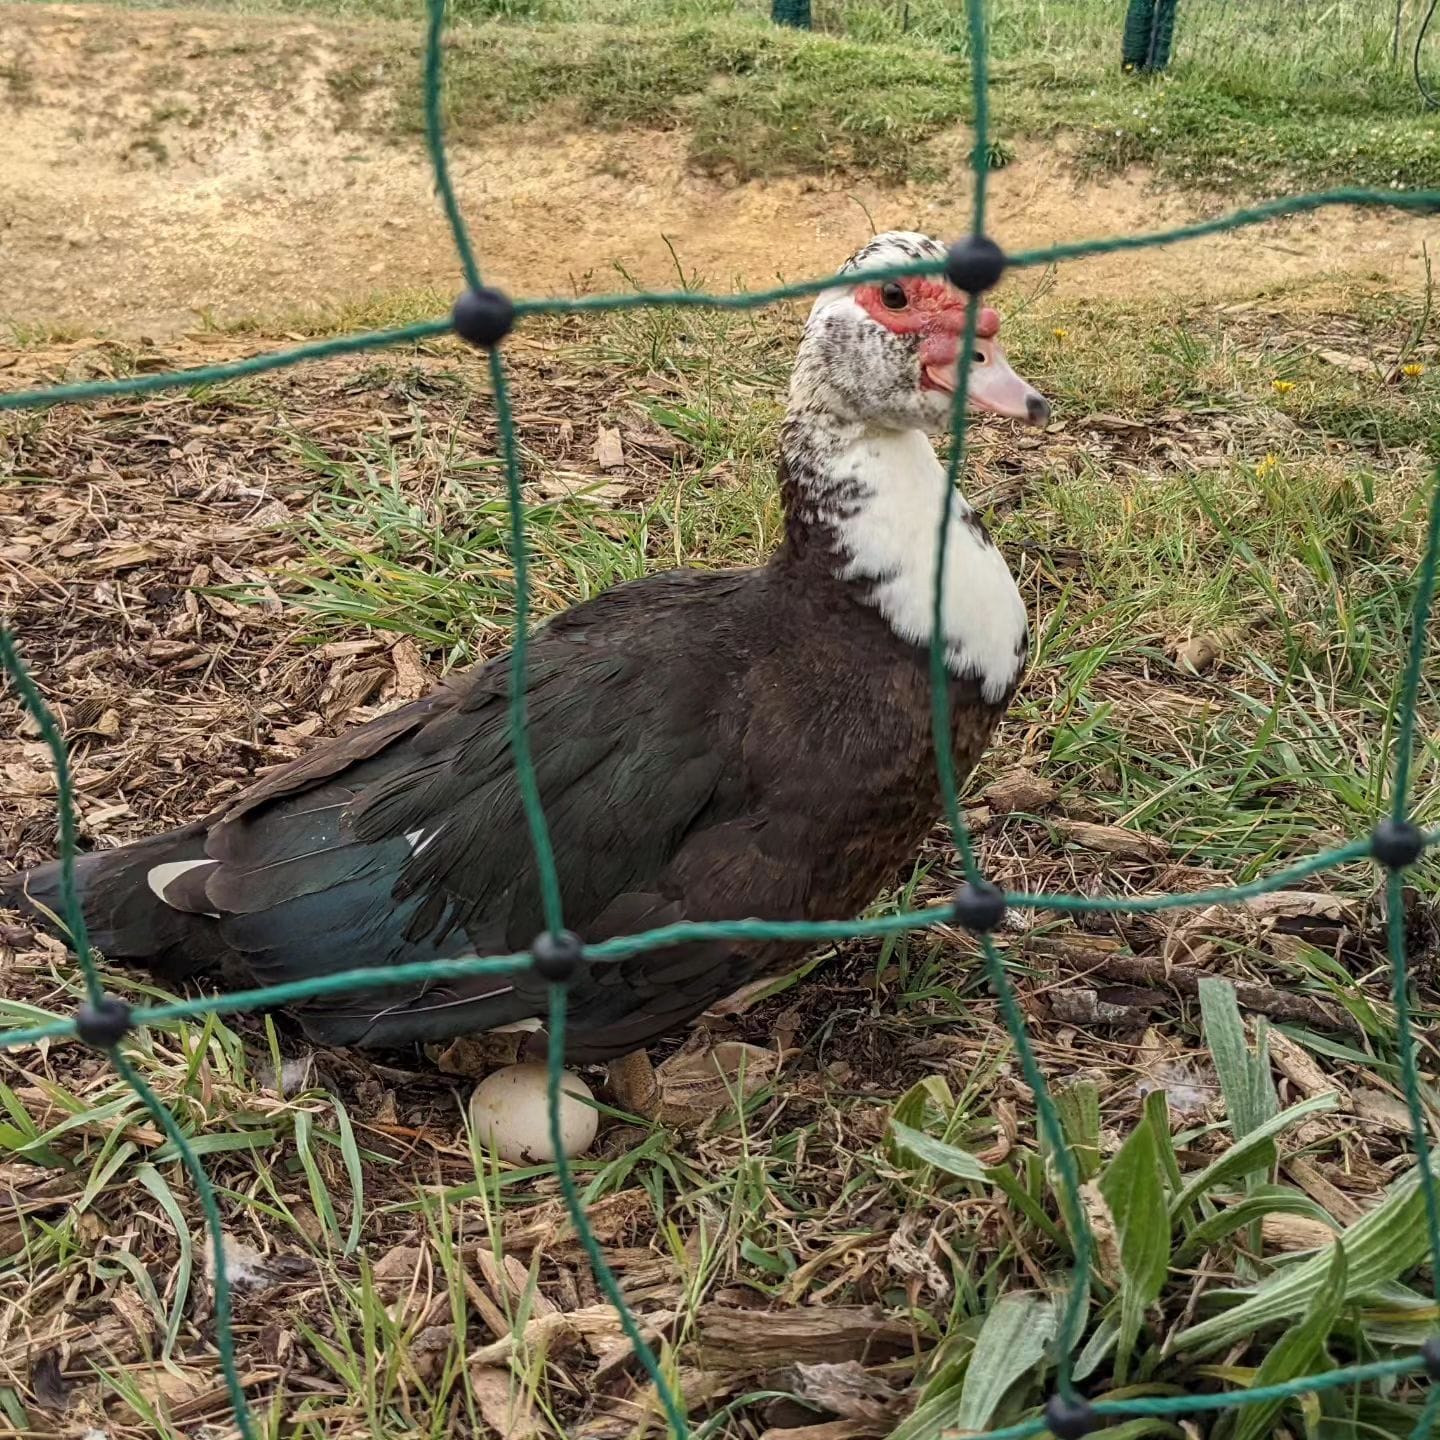 She probably suspected something after we kept taking the eggs she was laying in the coop, so she decided to lay one on the side of the pond